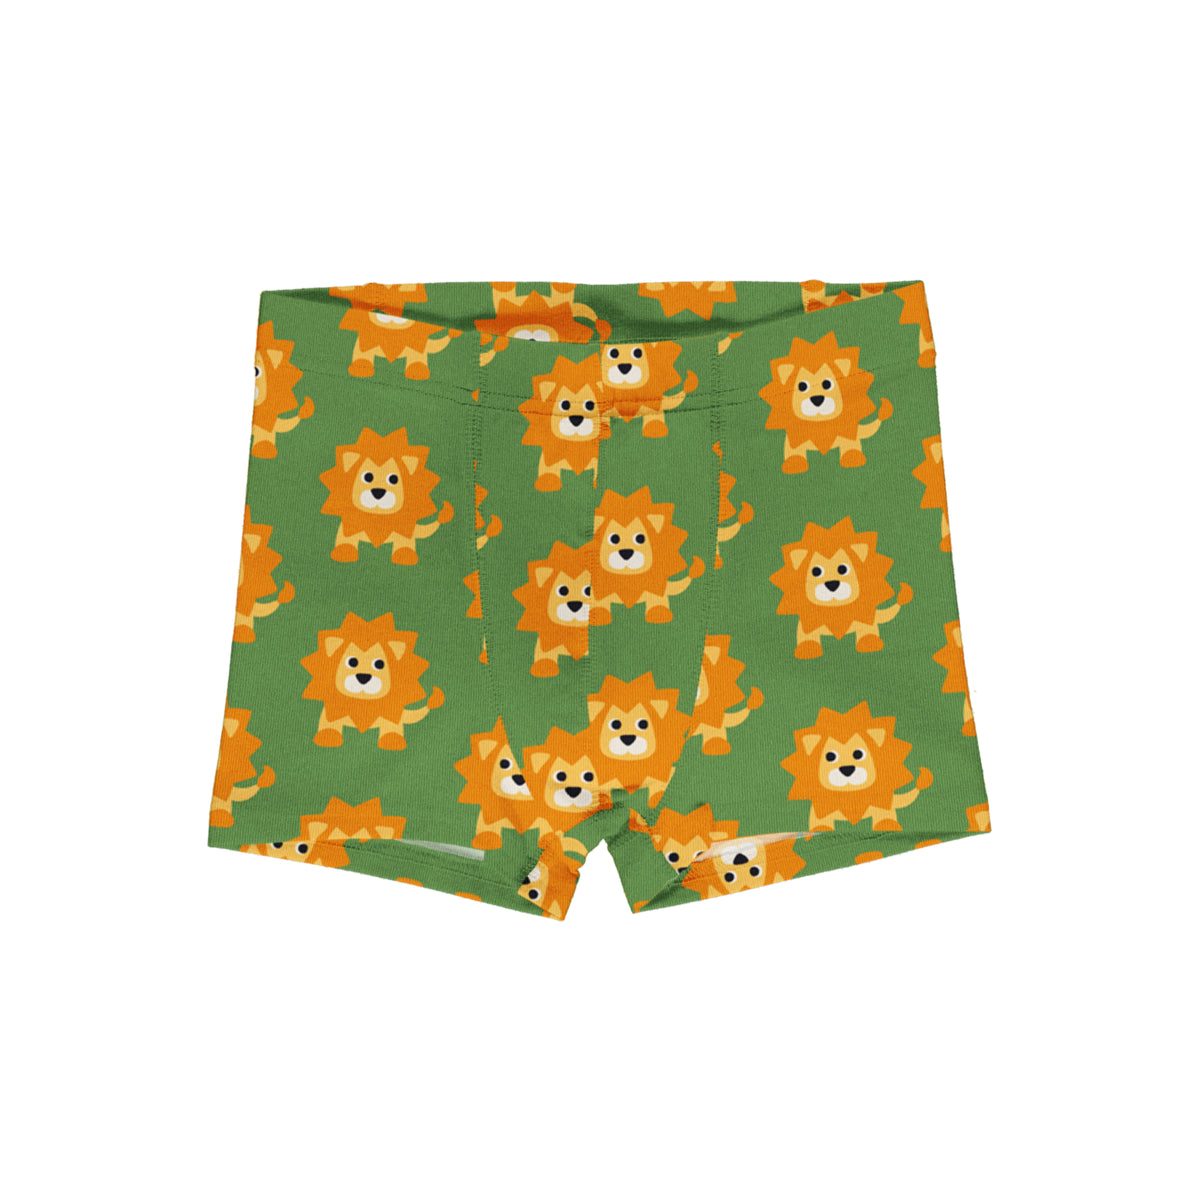 Underpants Otter Pet Lover Nice BuPoster Cotton Panties Mens Underwear  Ventilate Shorts Boxer Briefs From Xieyunn, $9.53